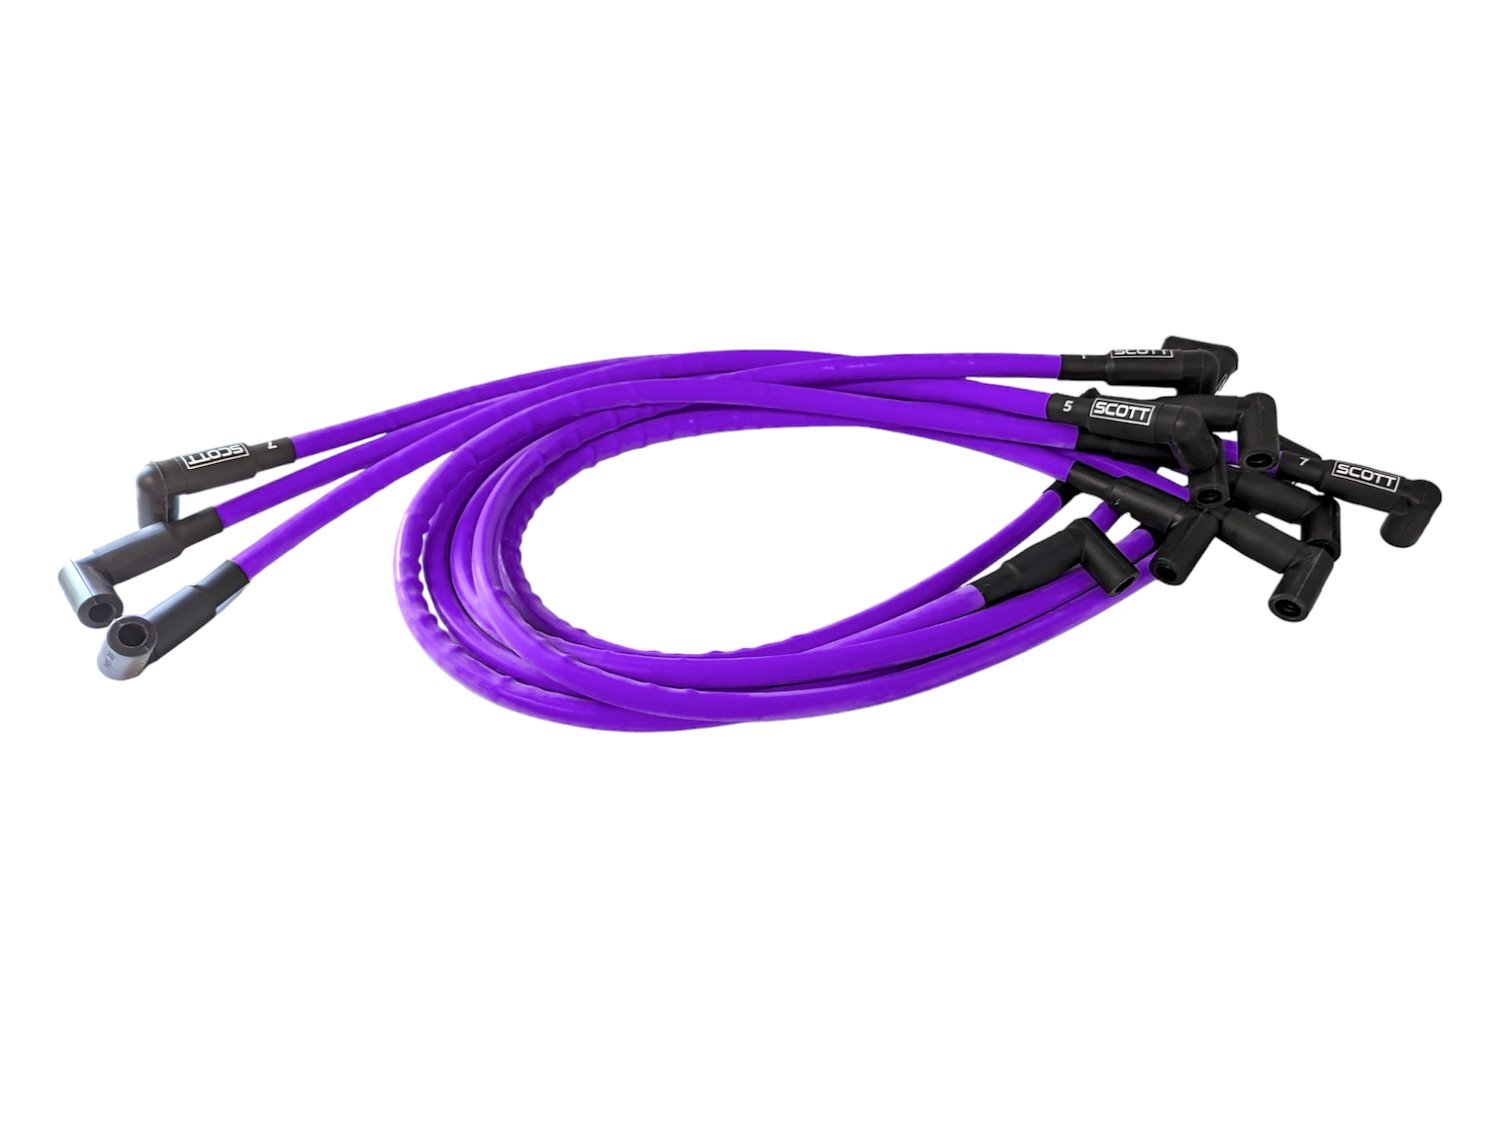 SPW-CH-435-6 High-Performance Silicone-Sleeved Spark Plug Wire Set for Small Block Chevy, Around Front [Purple]